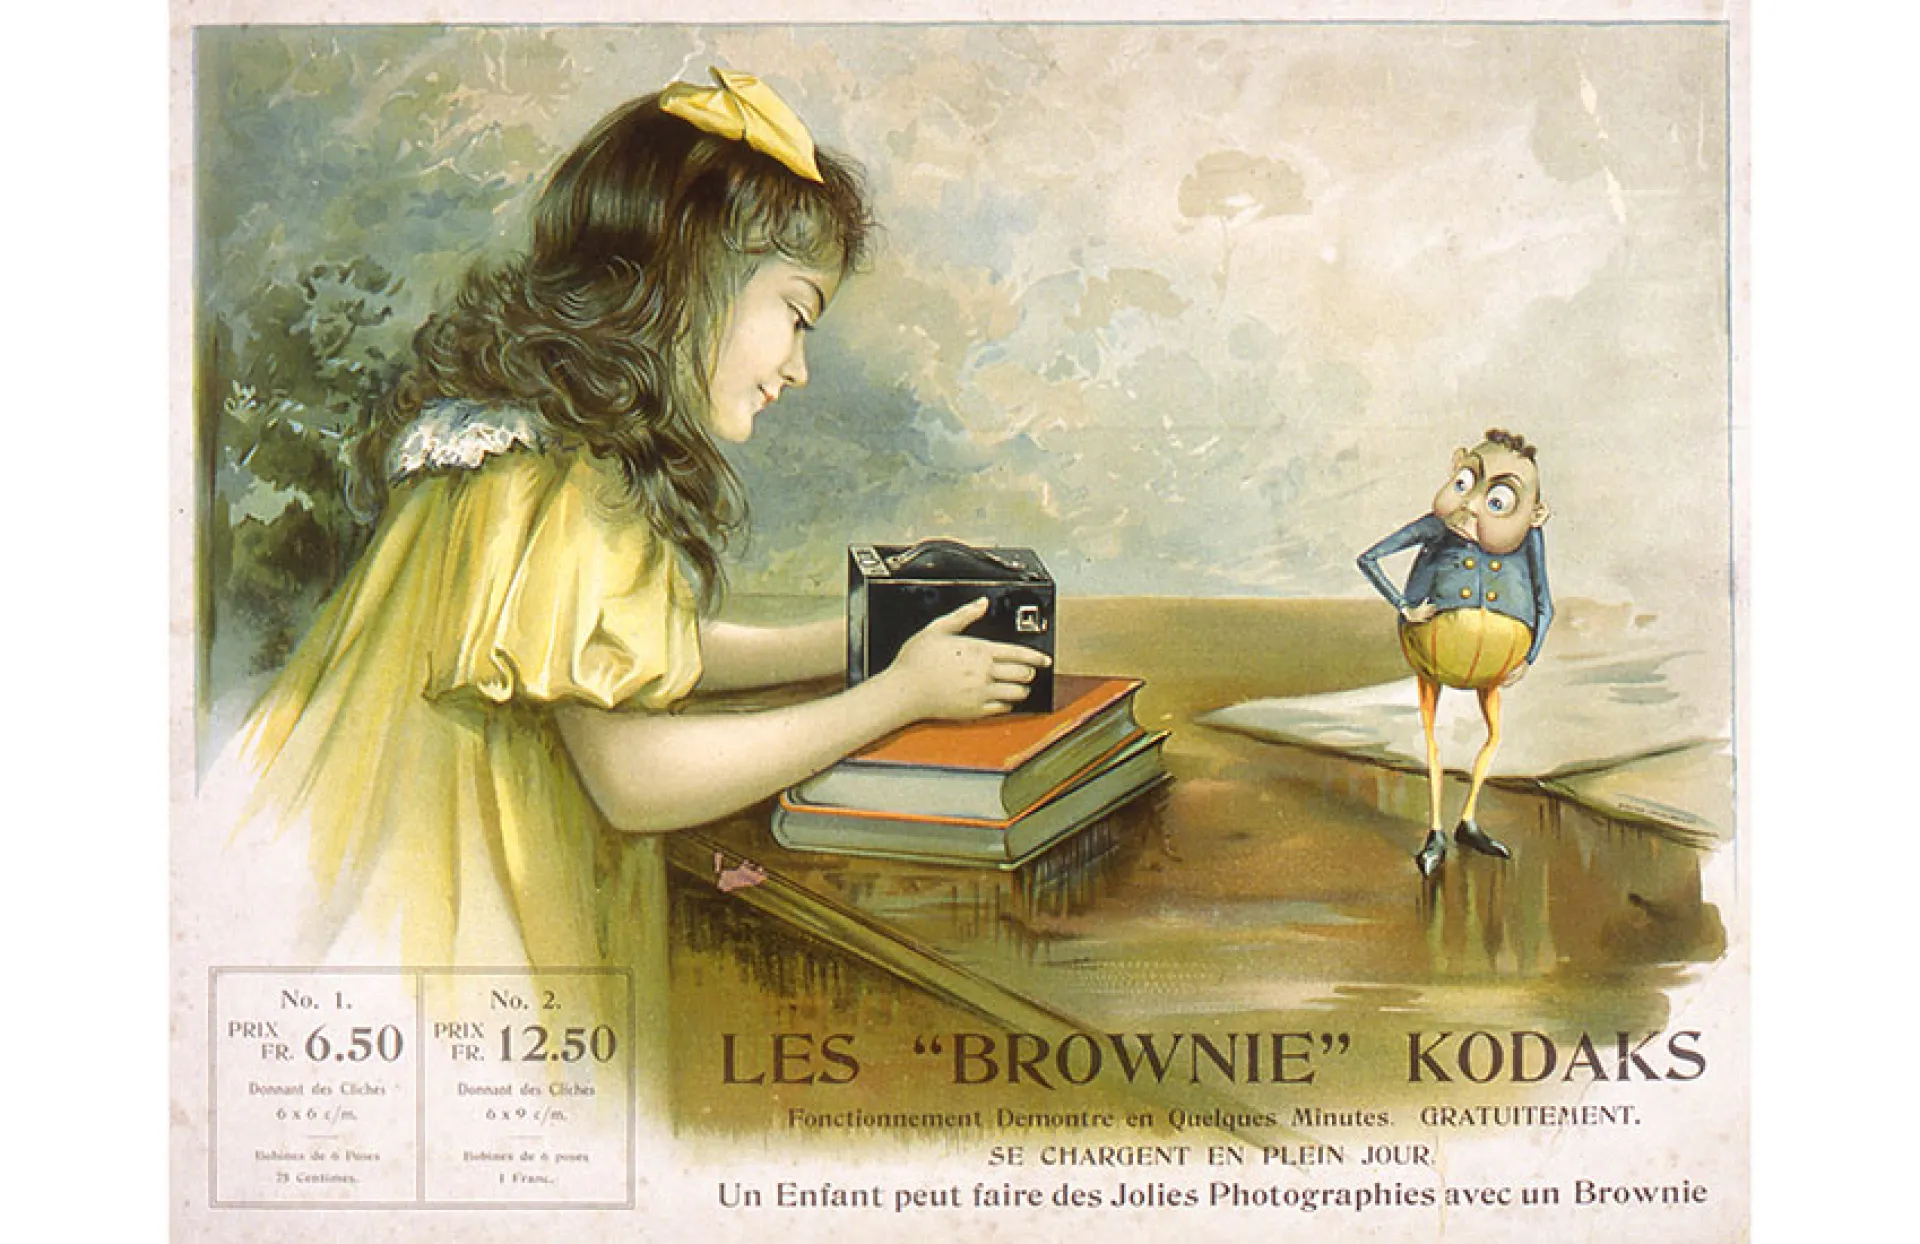 Ad showing the Brownie Camera